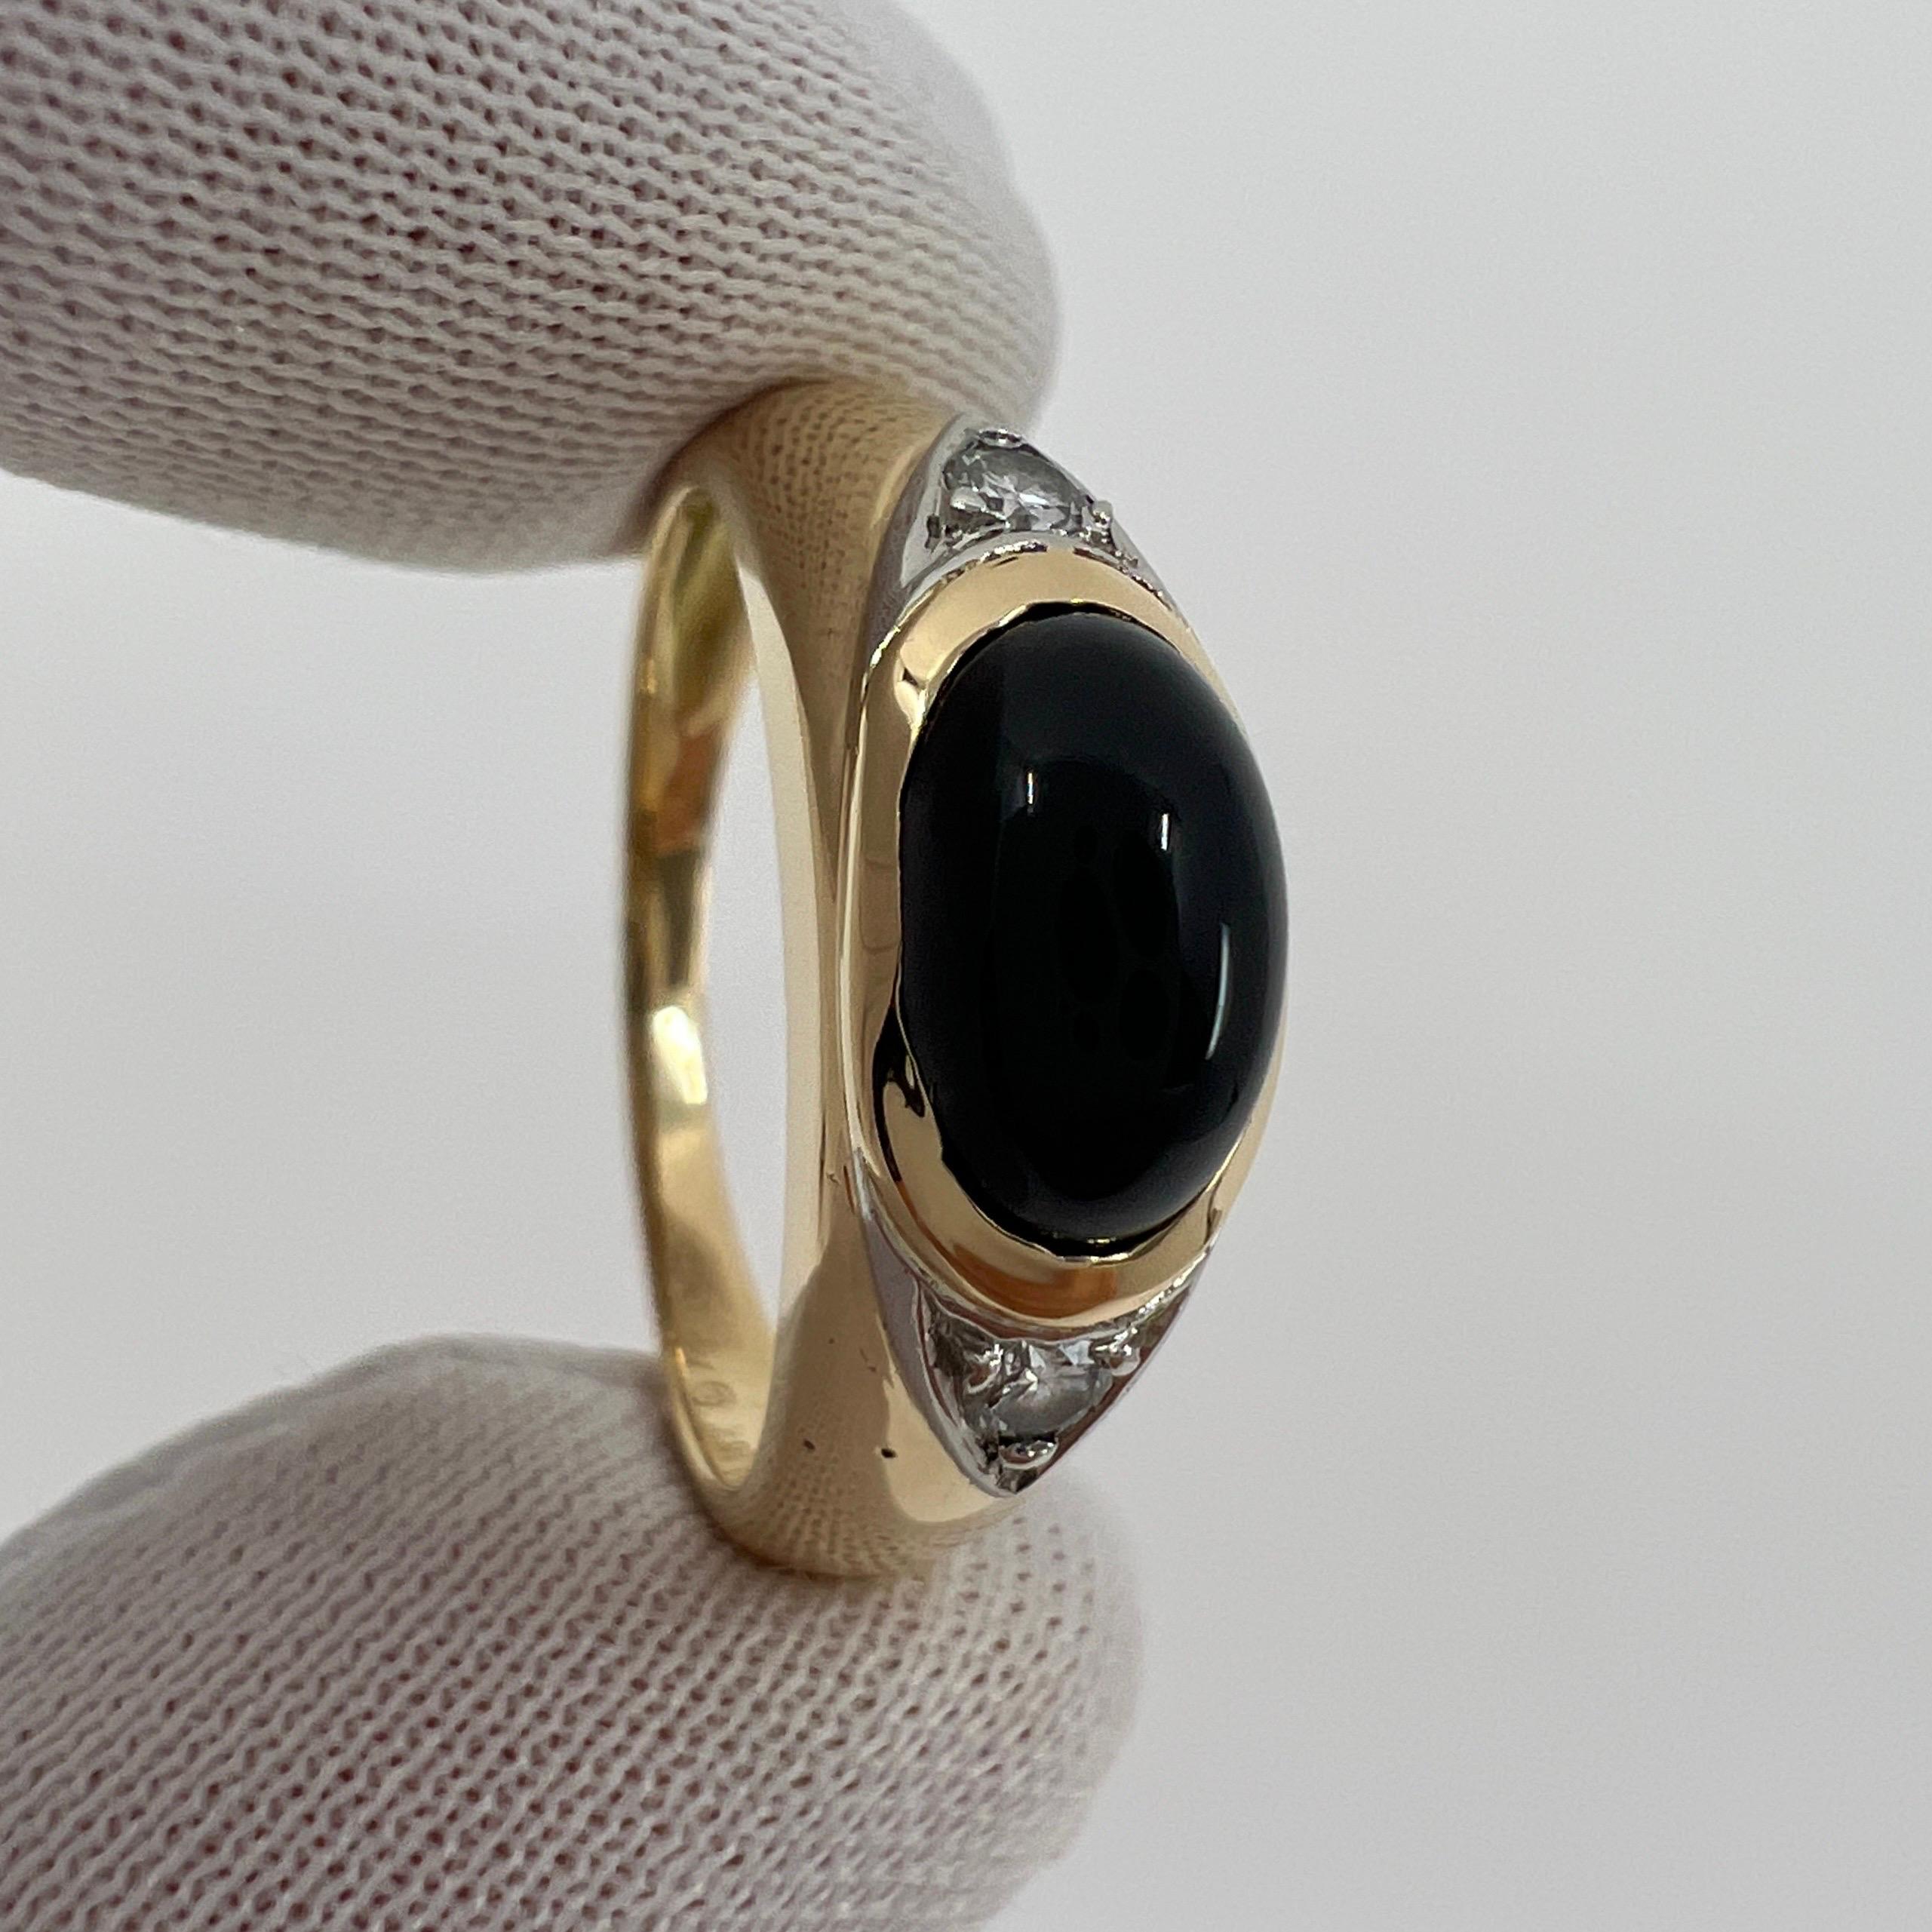 Vintage Rare Van Cleef & Arpels Onyx & Diamond 18k Gold Oval Cabochon Dome Ring For Sale 3